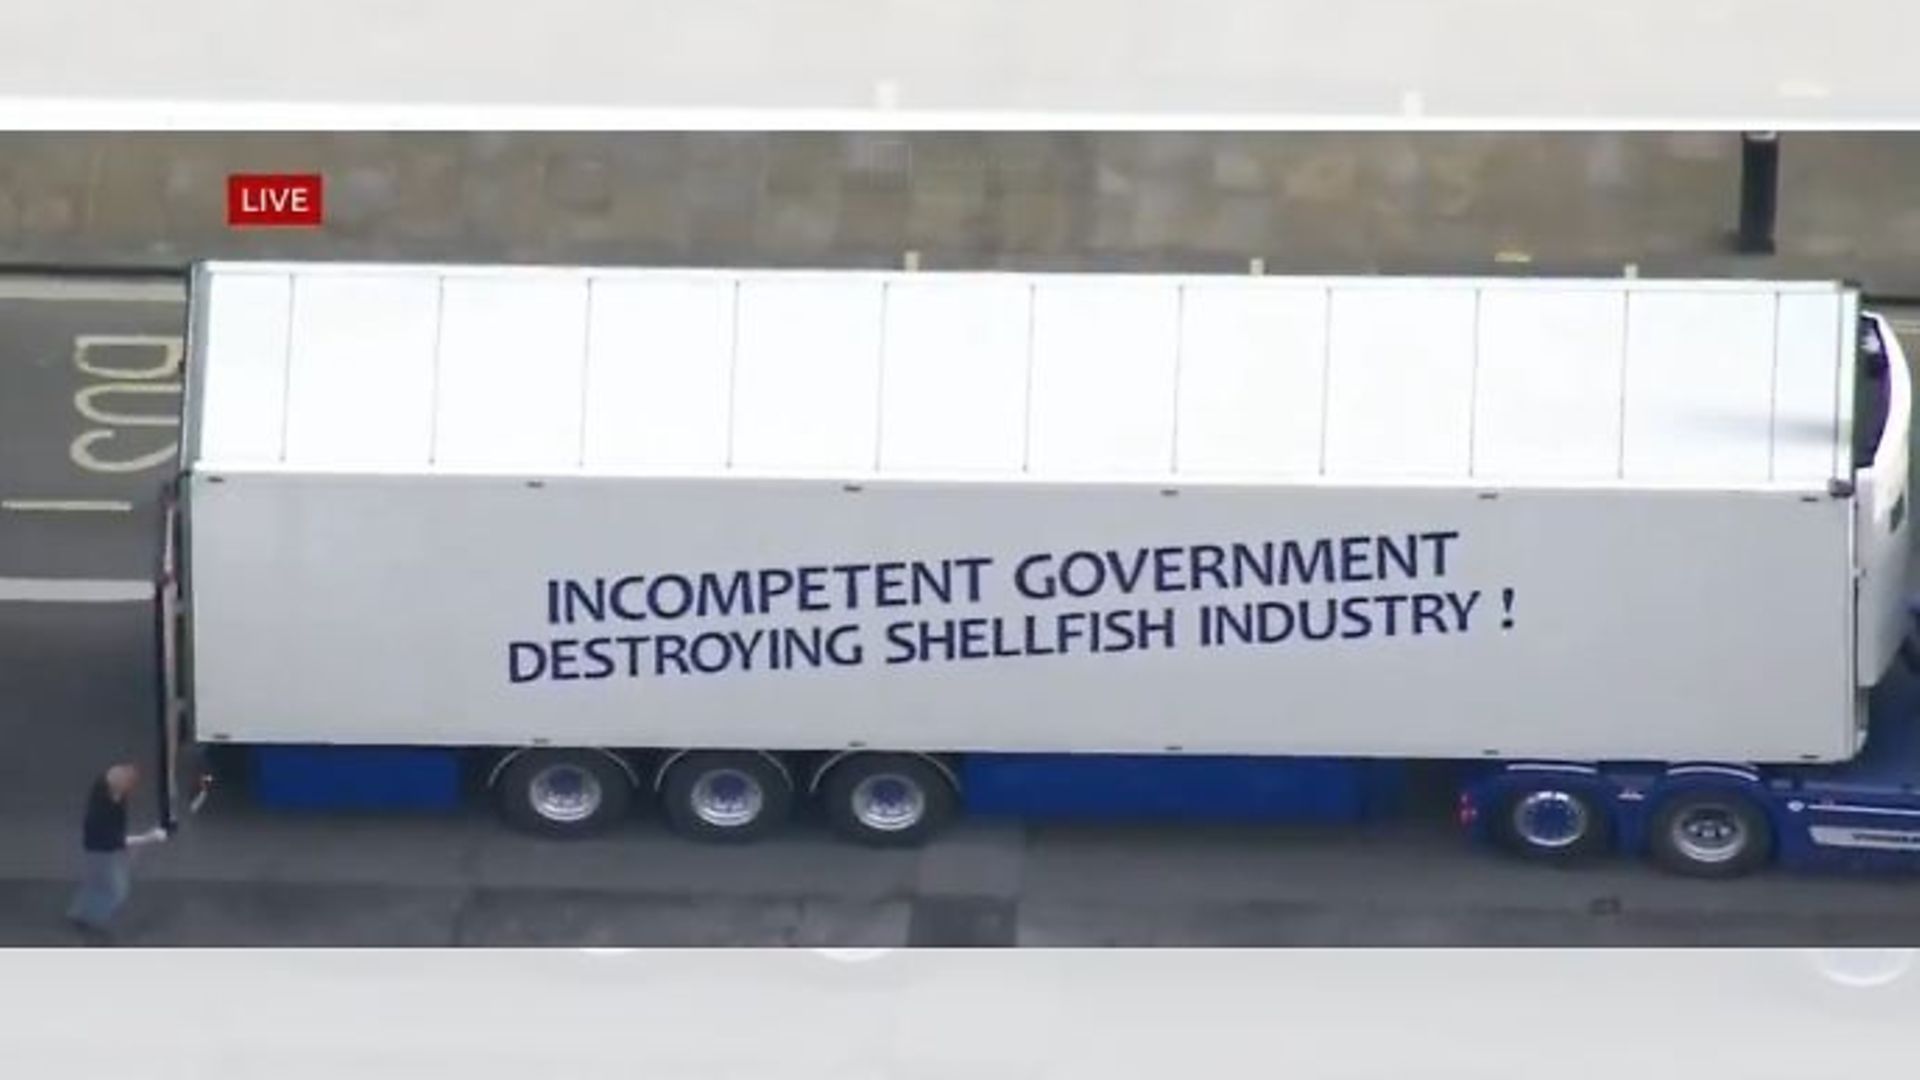 One of the lorries protesting on the roads near Downing Street - Credit: BBC